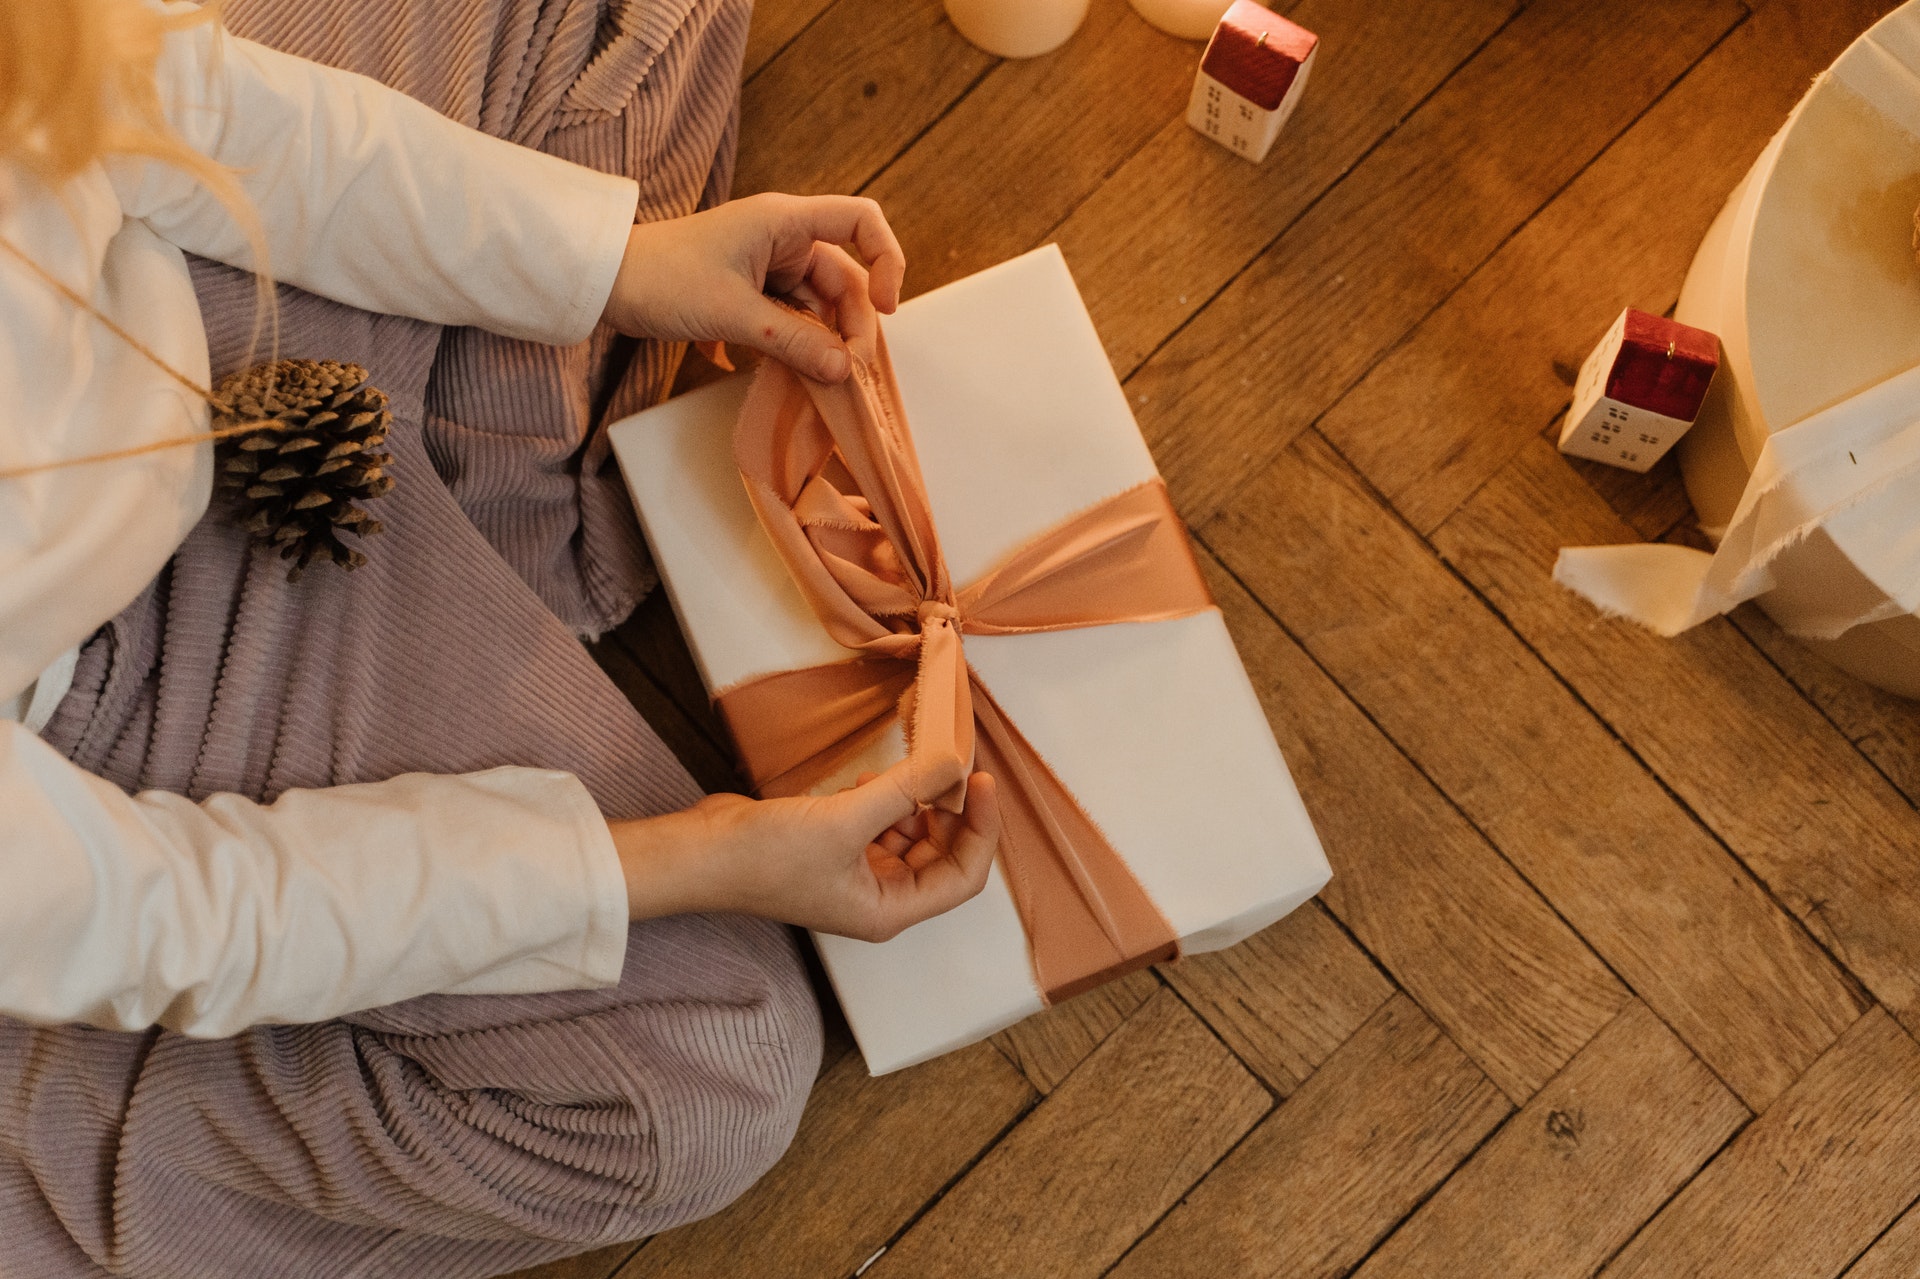 Sustainable Christmas Gift Ideas Guide. Ph. cottonbro, Pexels 